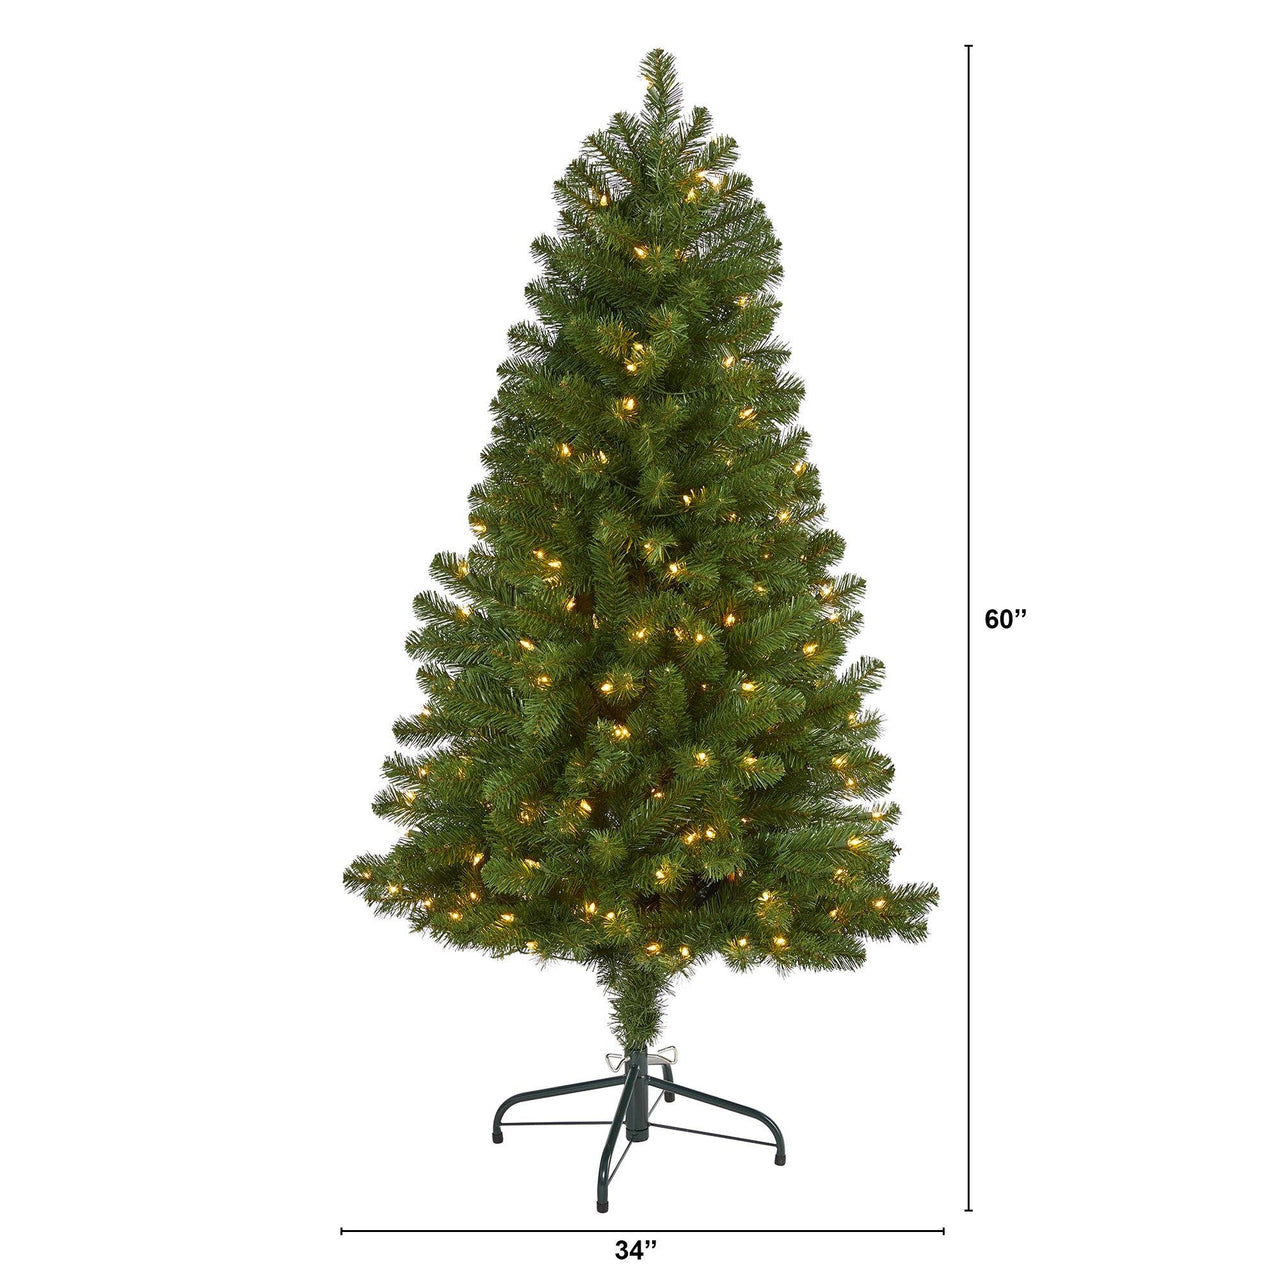 5’ Virginia Fir Artificial Christmas Tree with 200 Clear Lights and 379 Bendable Branches - The Fox Decor